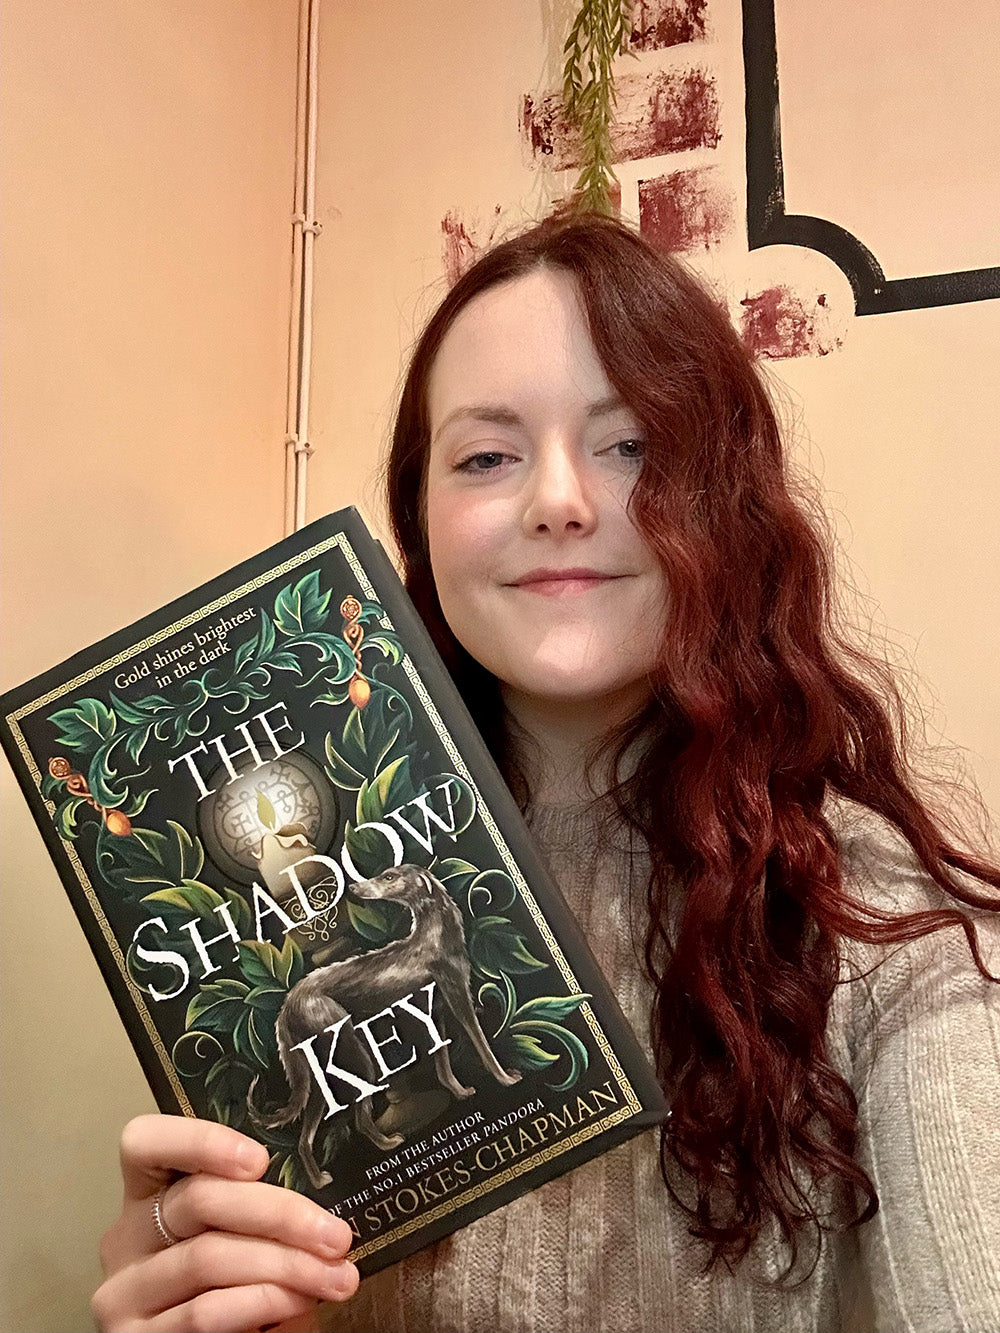 Colour selfie of a young woman holding a copy of The Shadow Key and smiling